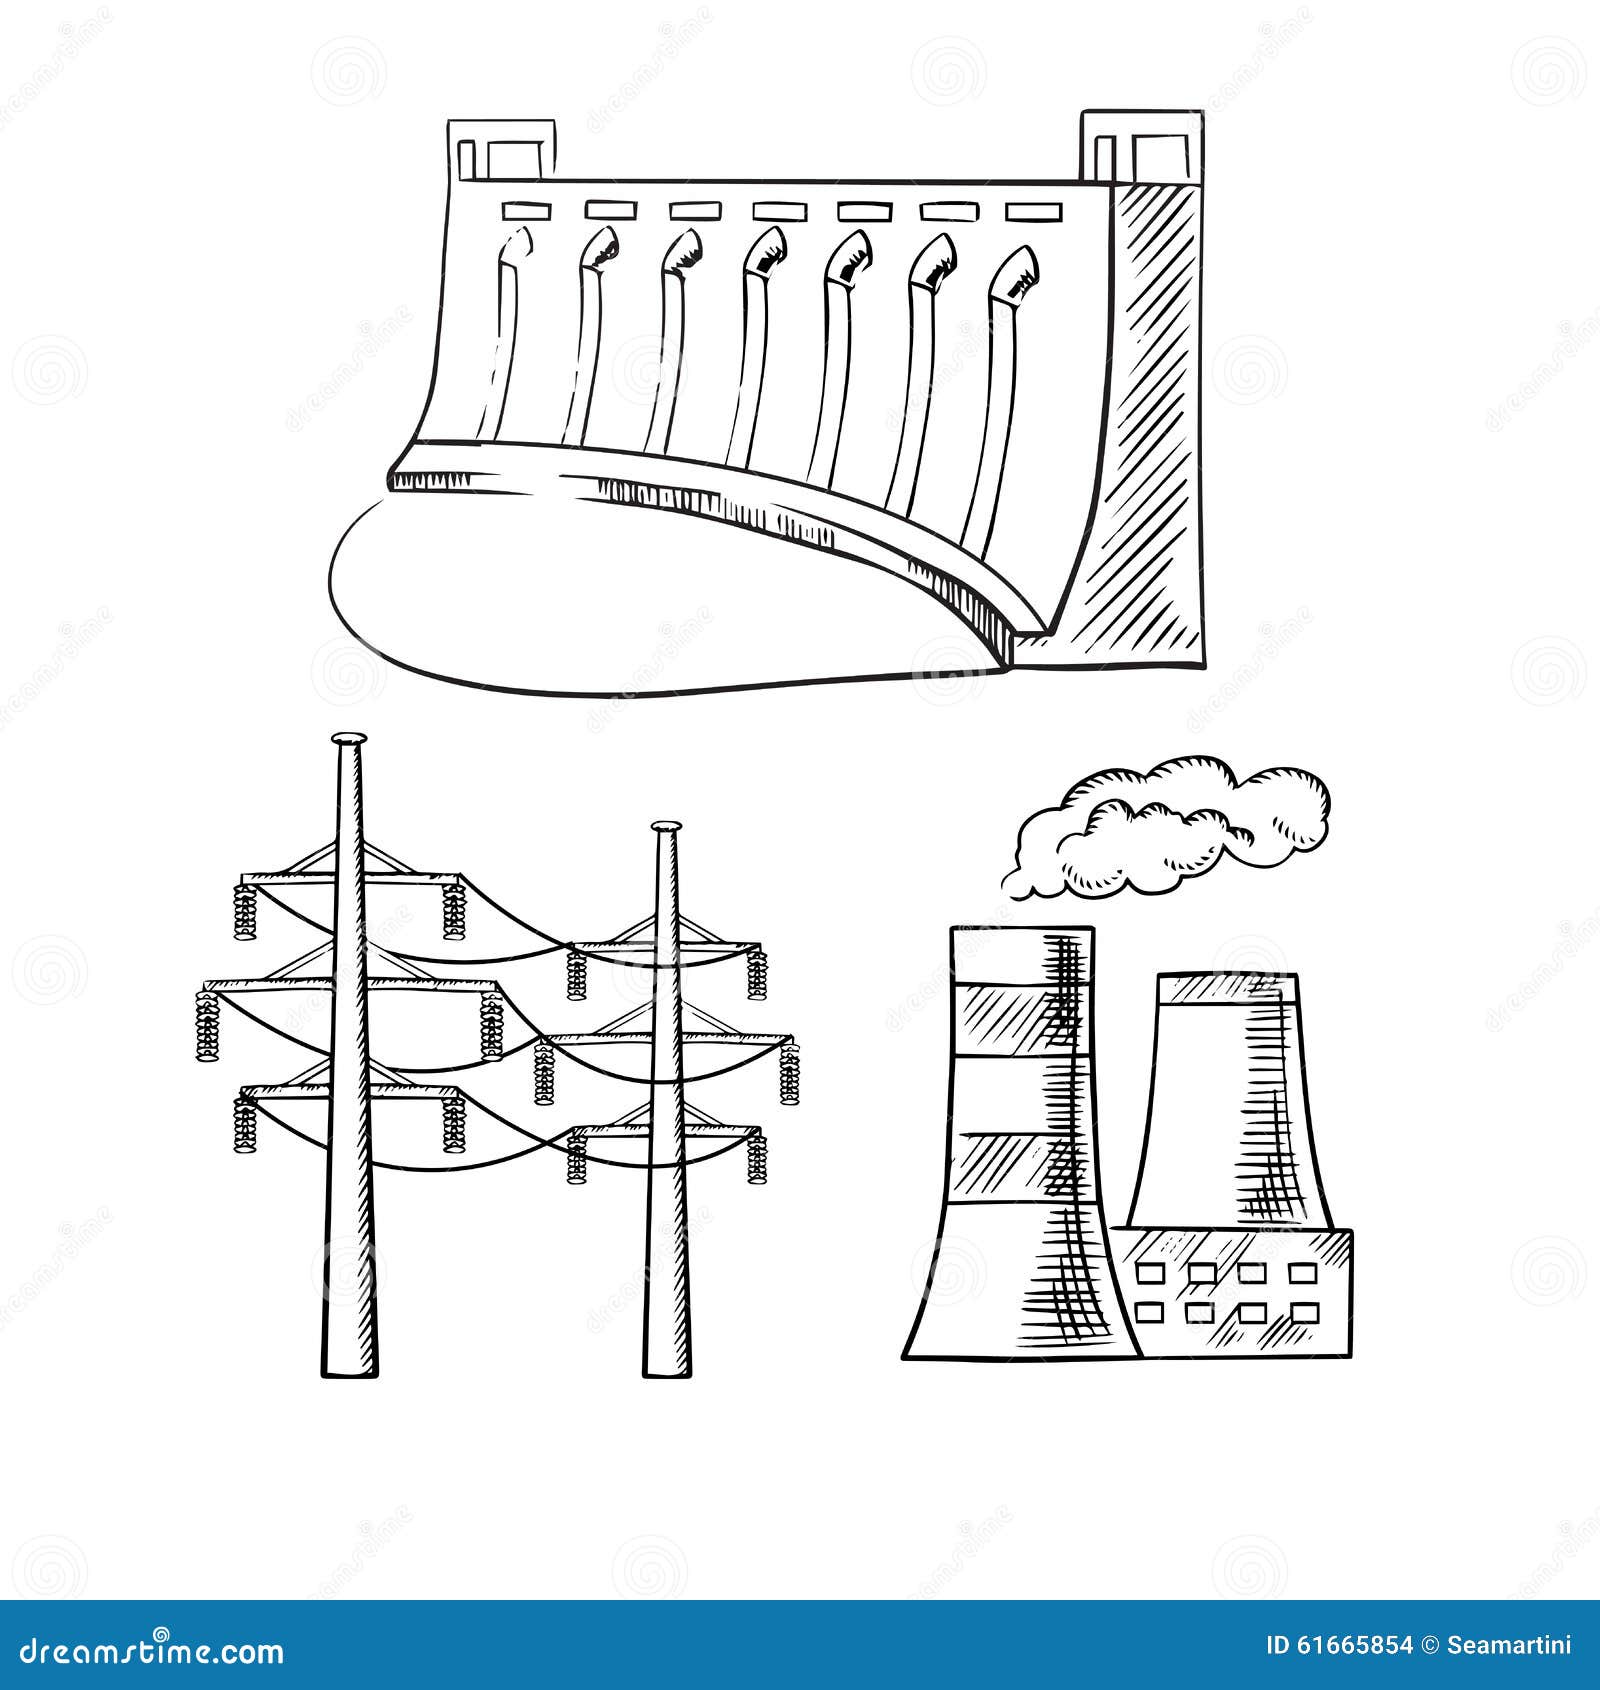 Electrical Power Plants And Towers Sketch Icons Stock Vector - Image